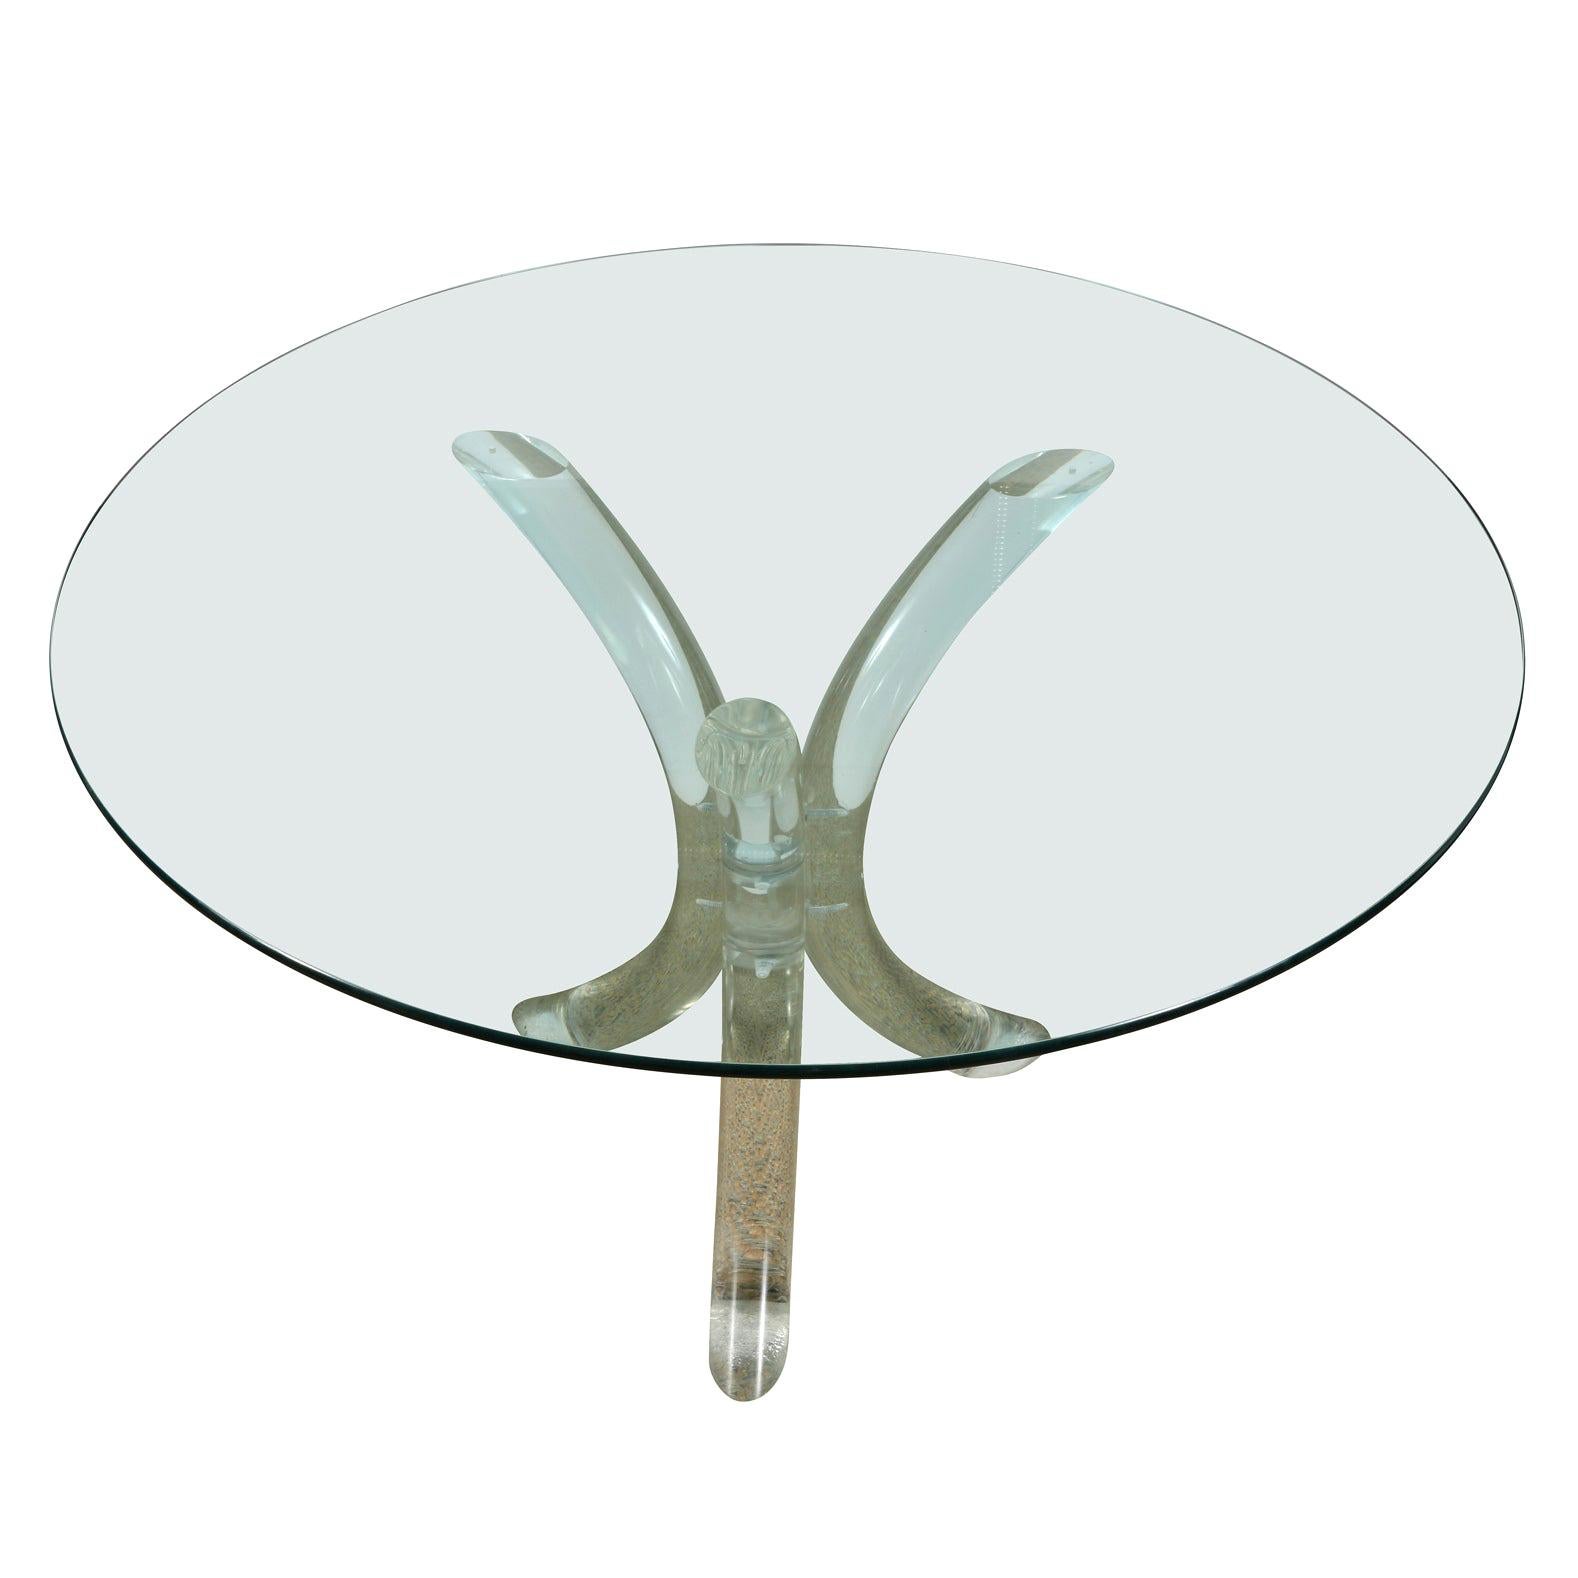 Vintage Lucite and Glass Pedestal Table